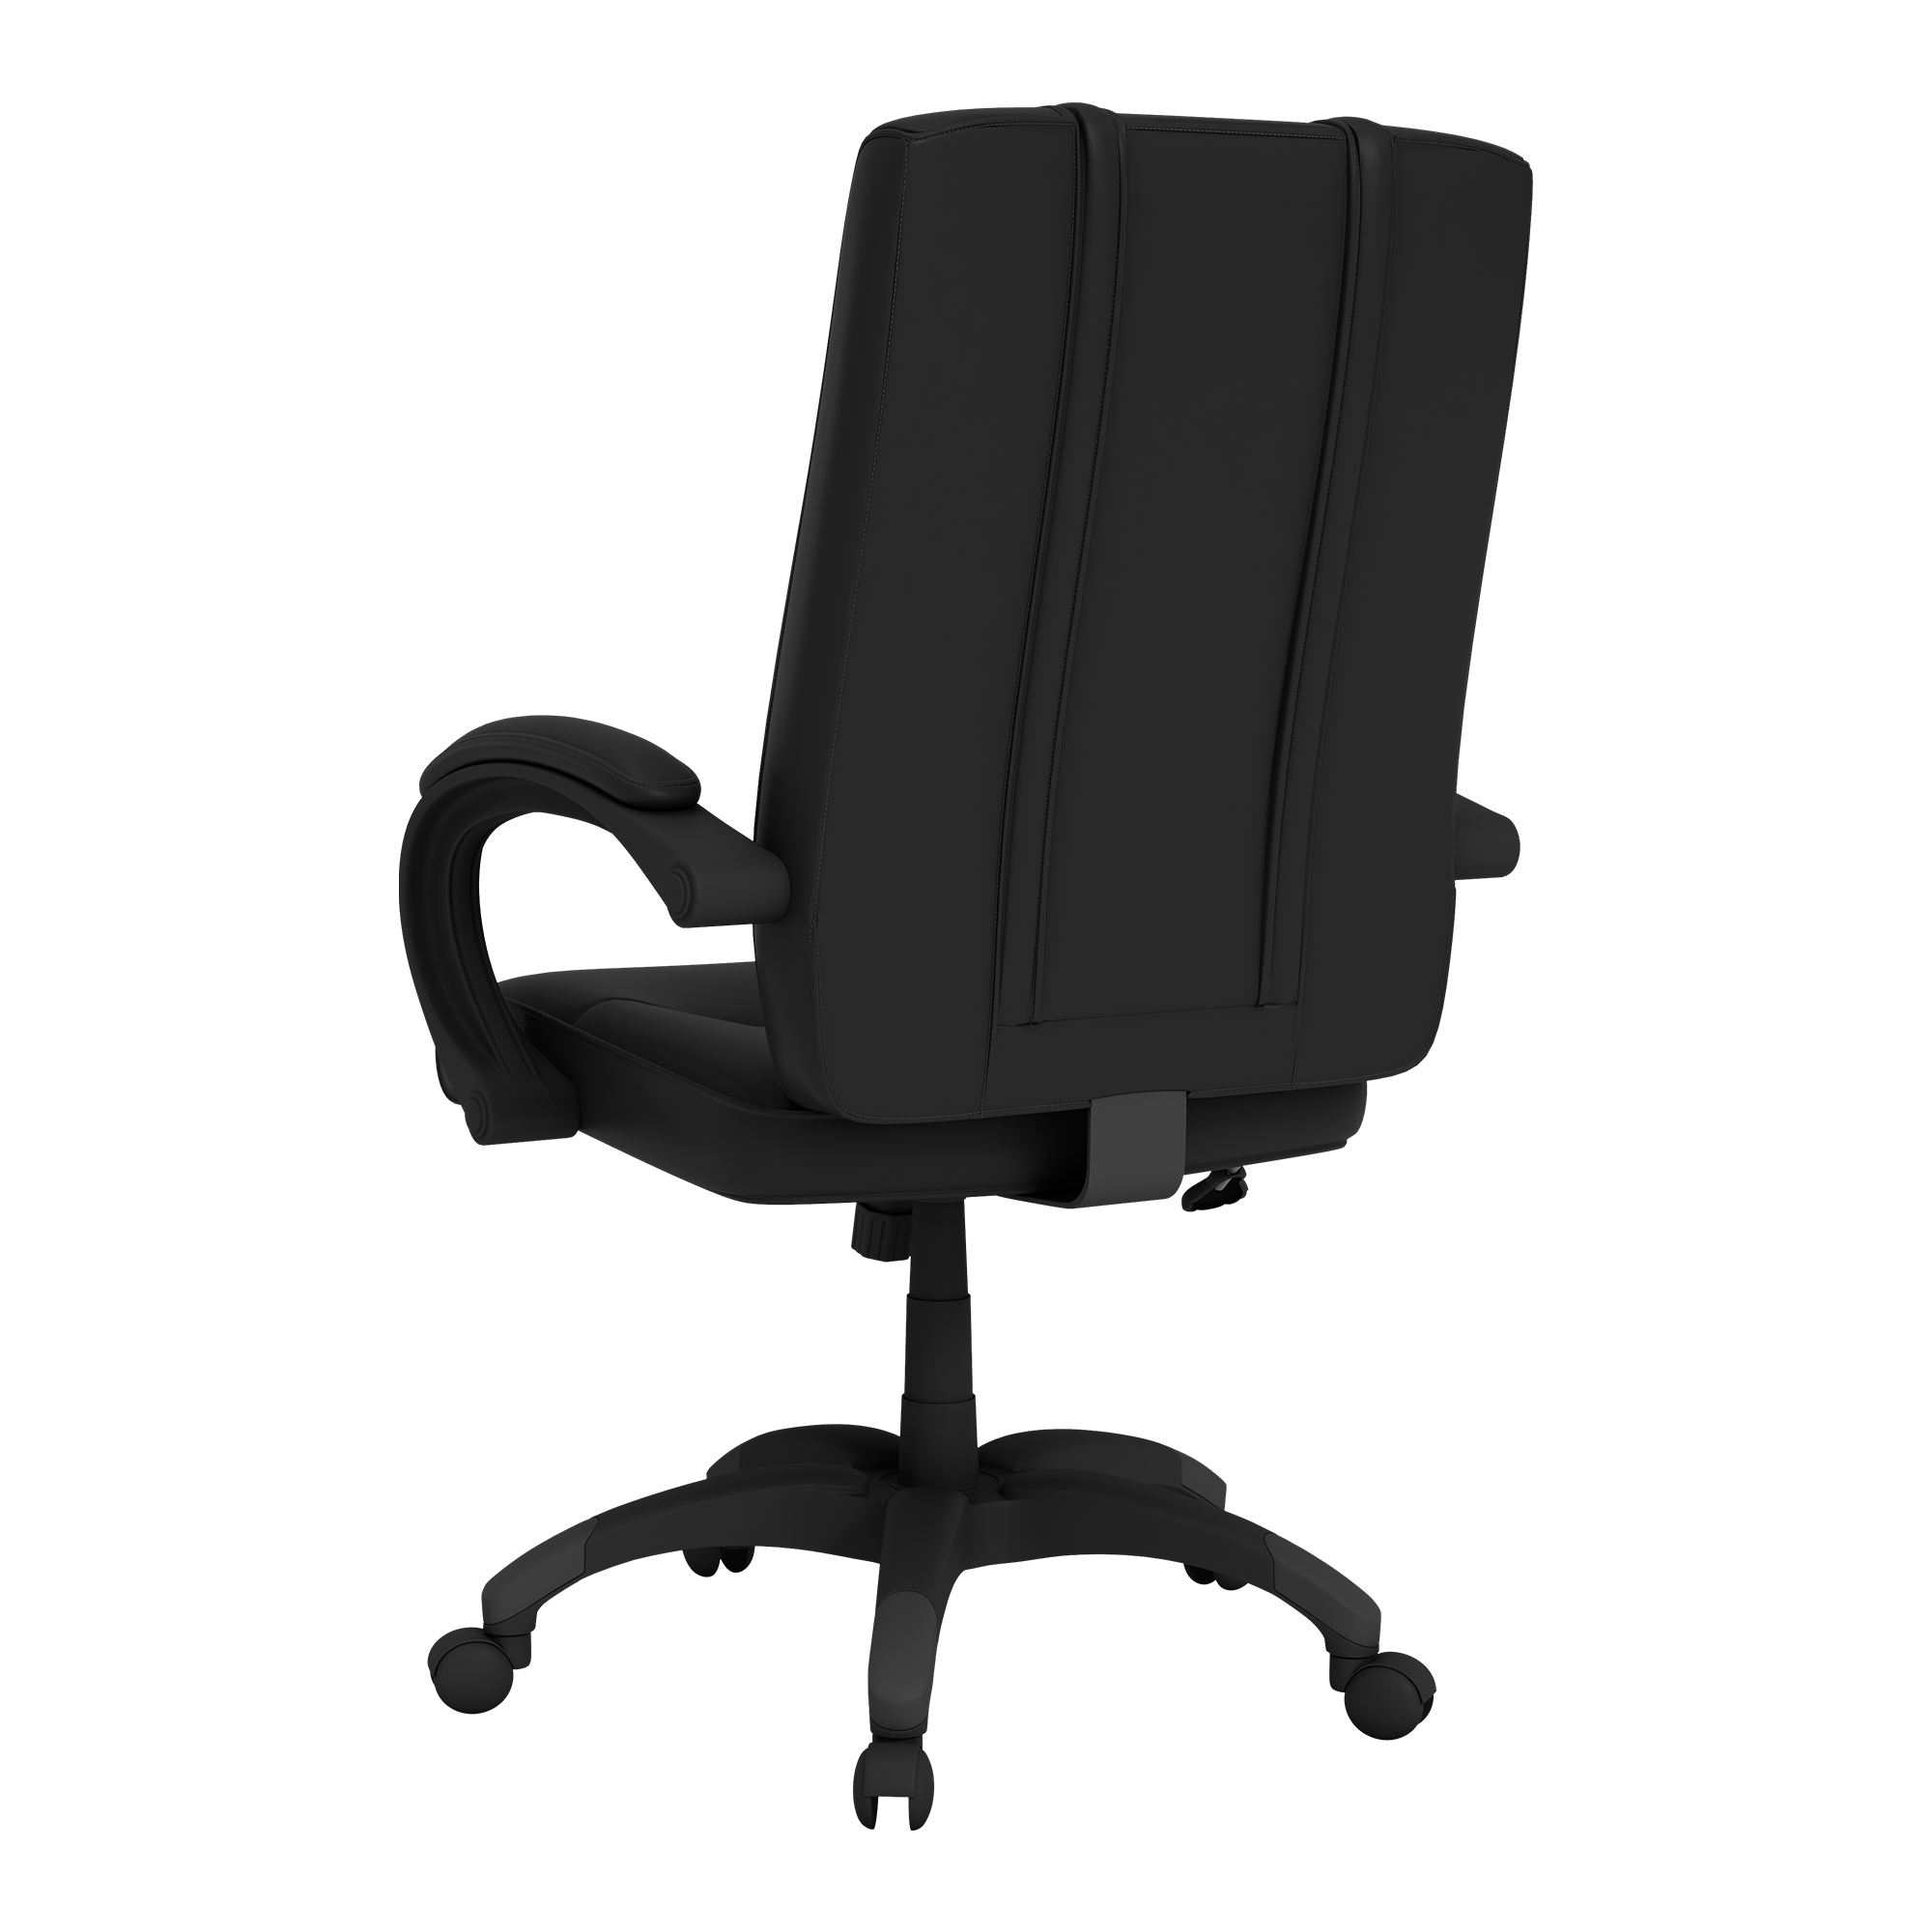 Office Chair 1000 with  Jacksonville Jaguars Primary Logo